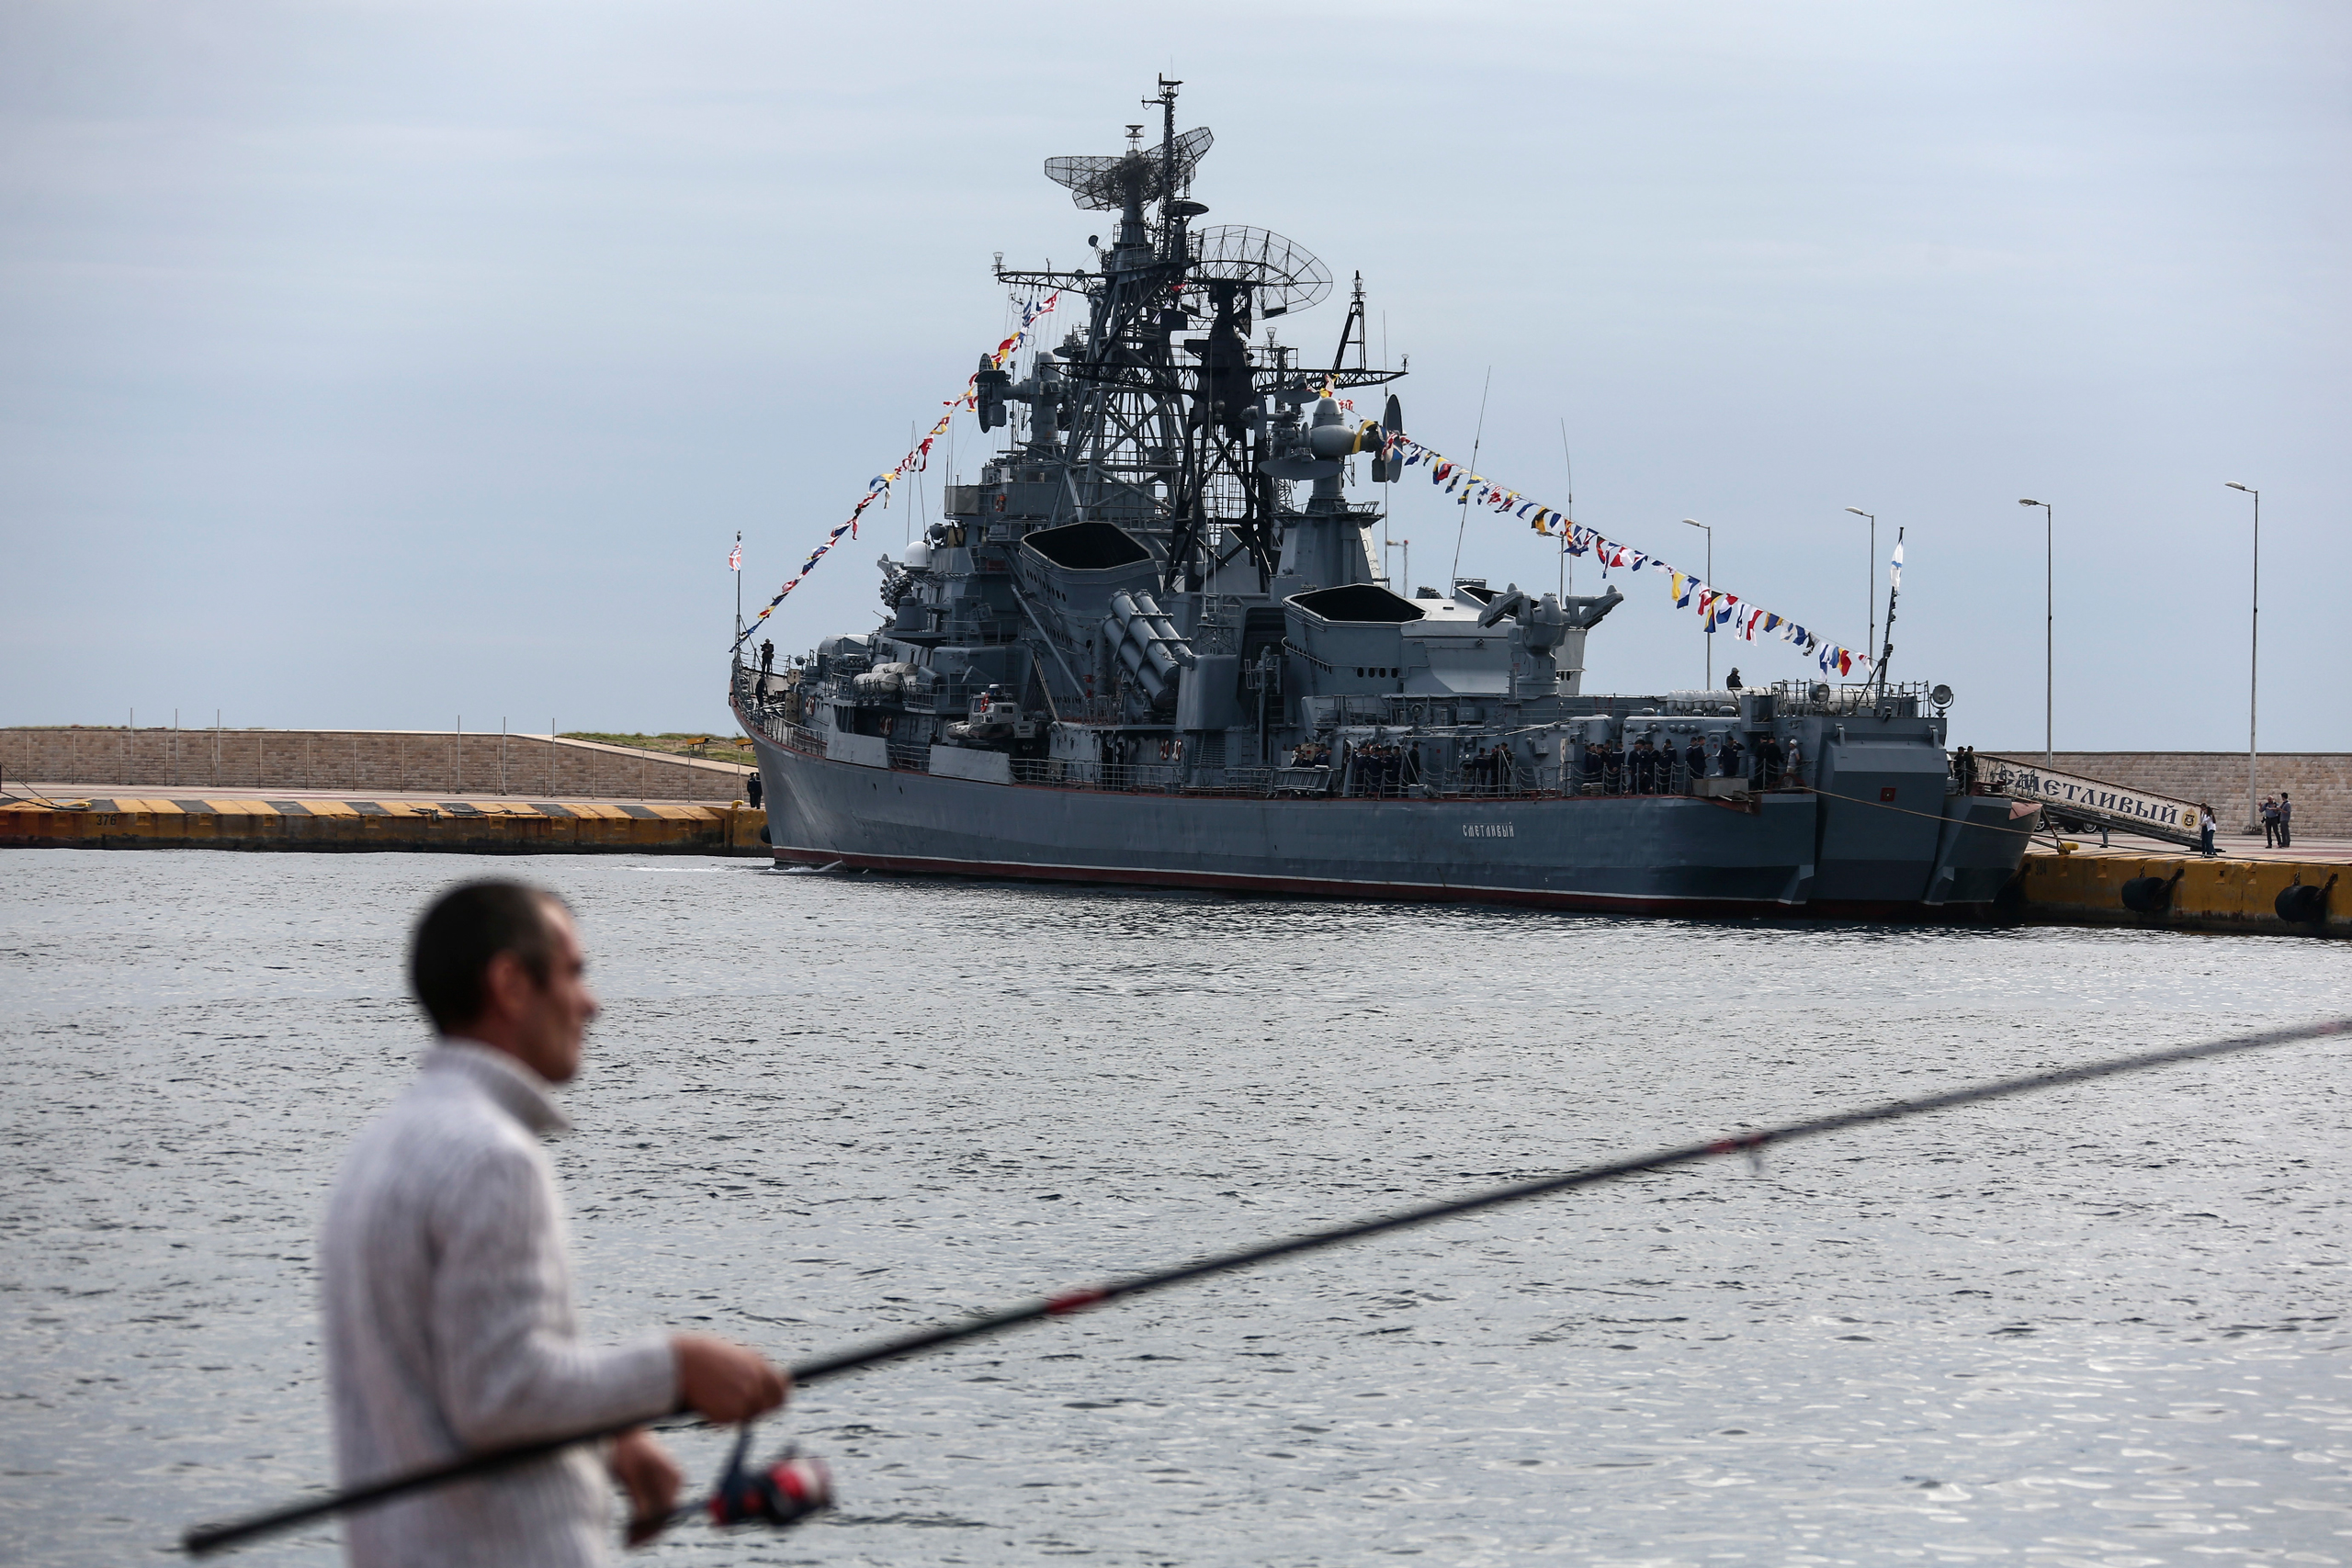 A man fishes near to the Russian Navy missile destroyer Smetlivy, moored at a pier in Piraeus port, near Athens, Sunday, Oct. 30, 2016. (Yorgos Karahalis—AP)